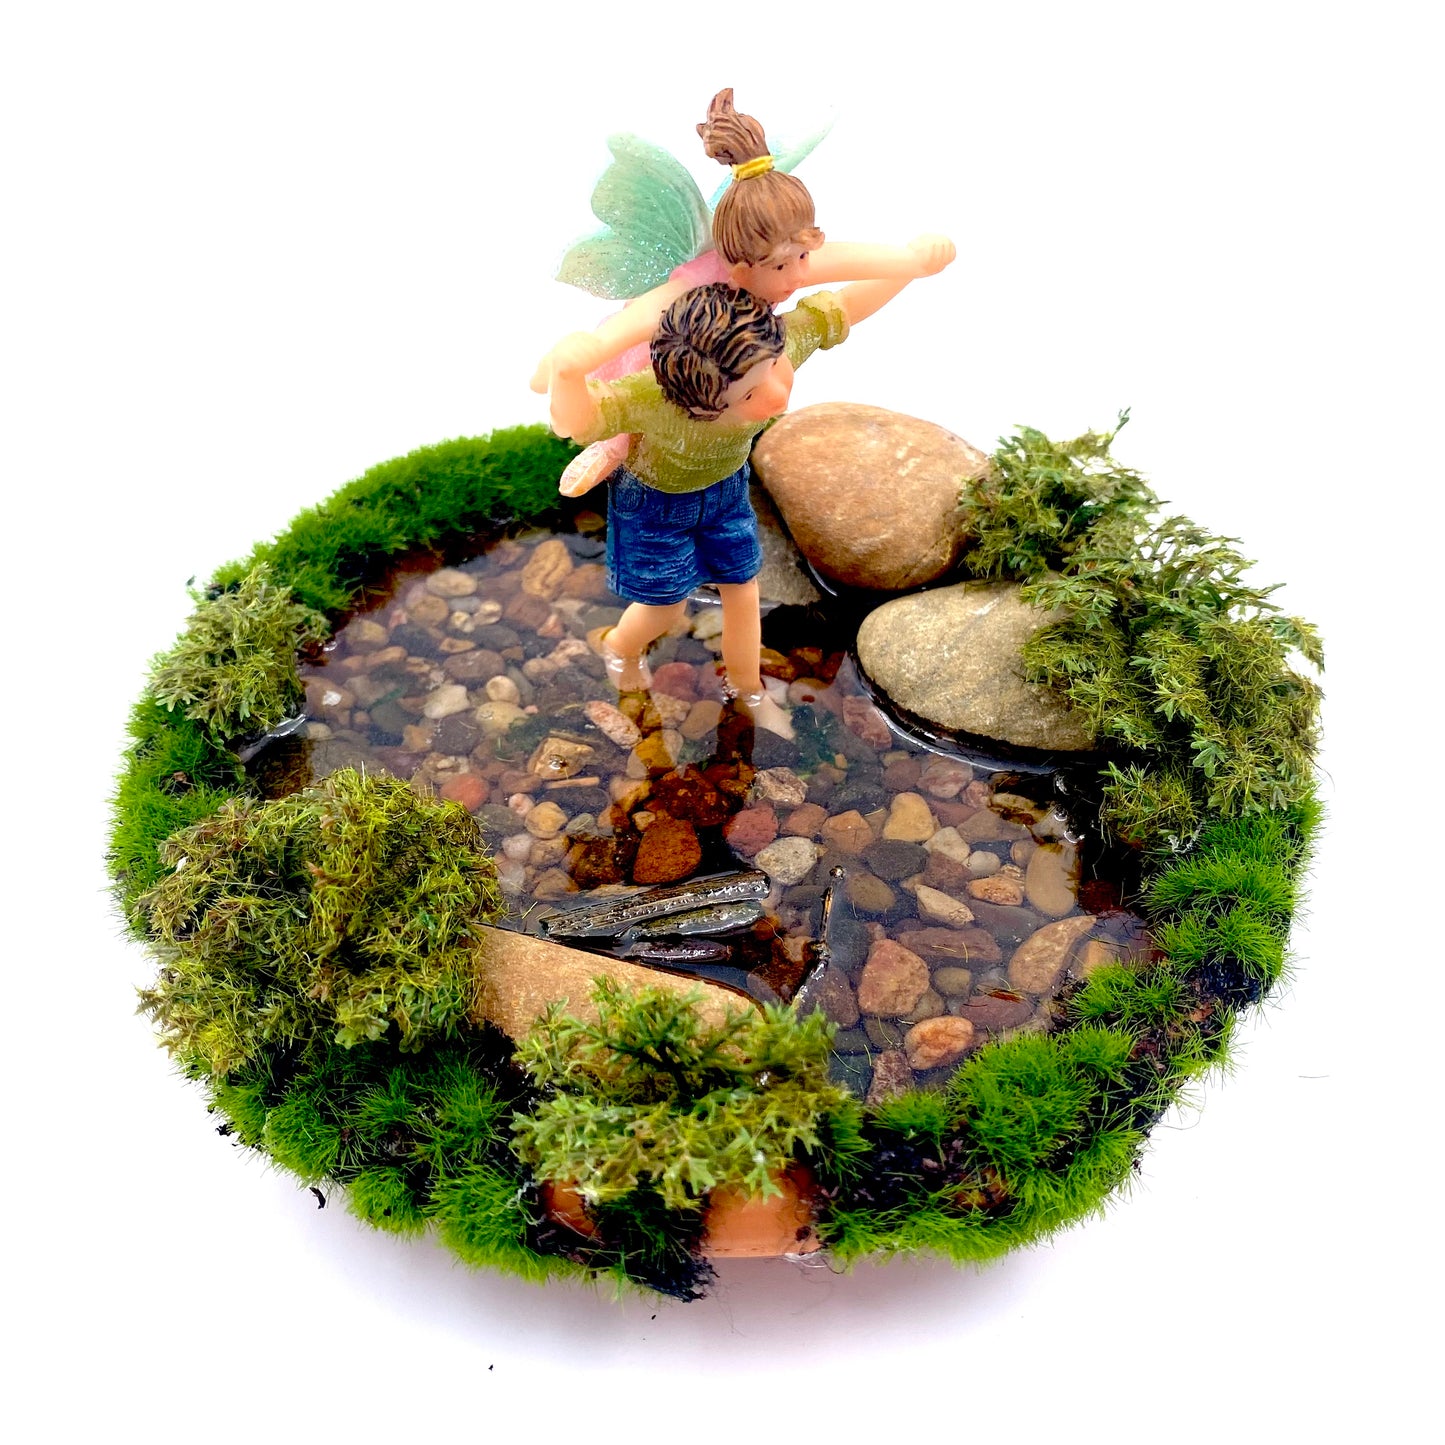 Fairy Garden Fairies Playing In A Pond